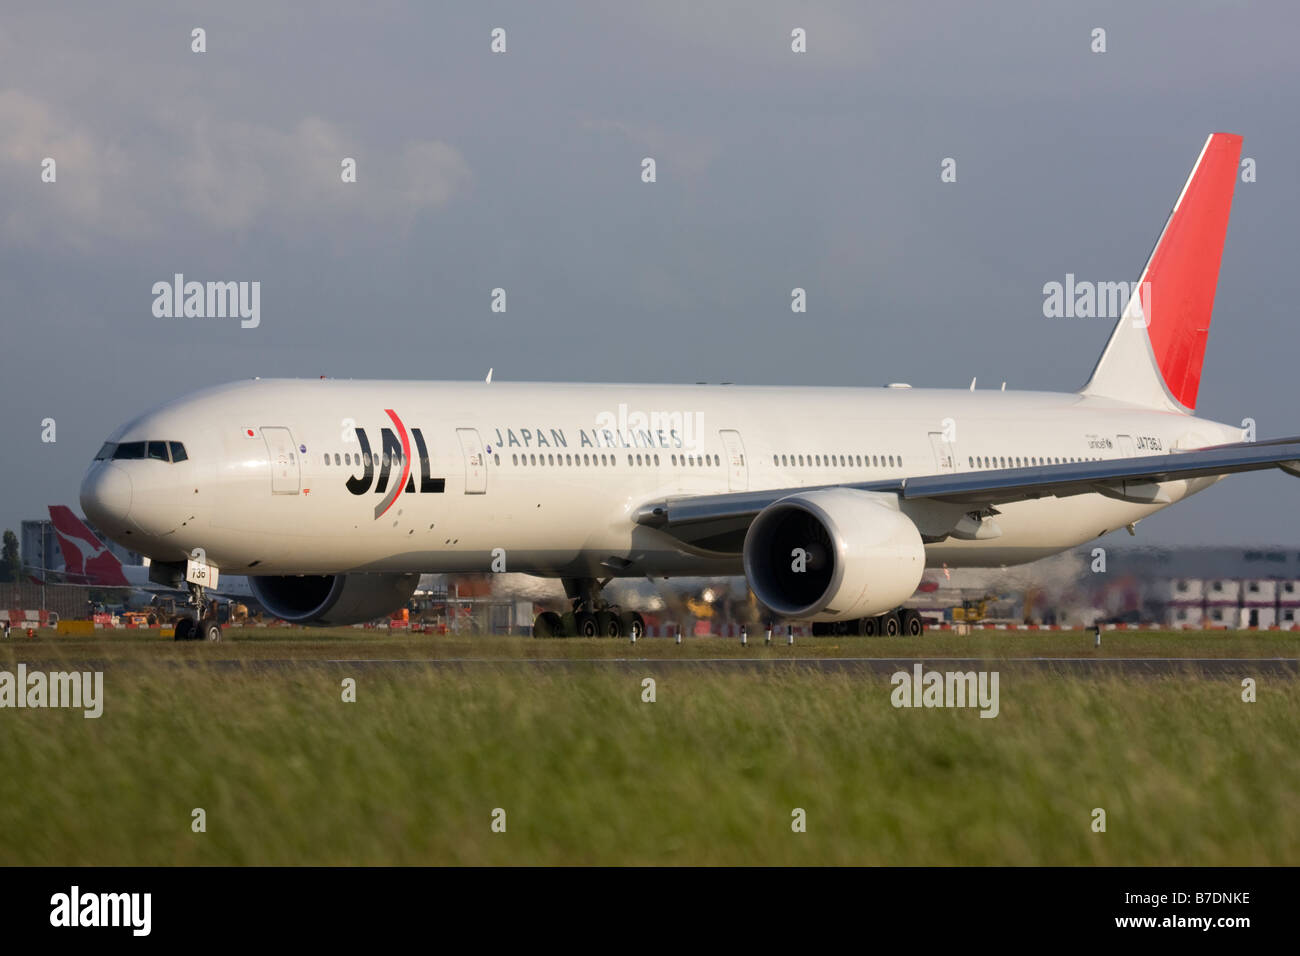 Japan Airlines - JAL Boeing 777-346/ER taxiing for departure at London Heathrow airport. Stock Photo